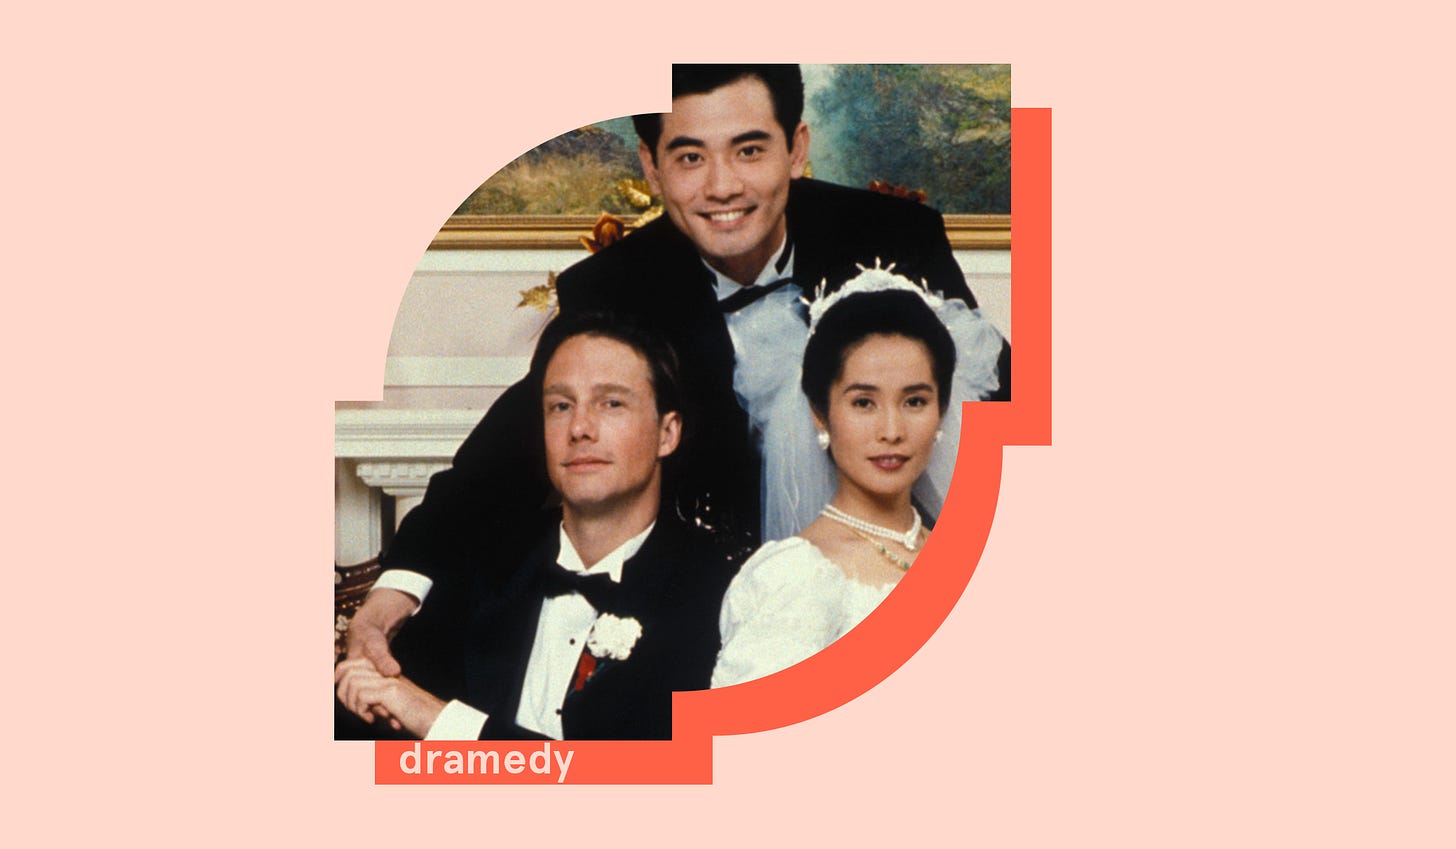 Winston Chao, Mitchell Lichtenstein, and May Chin in The Wedding Banquet. Courtesy of The Samuel Goldwyn Company.